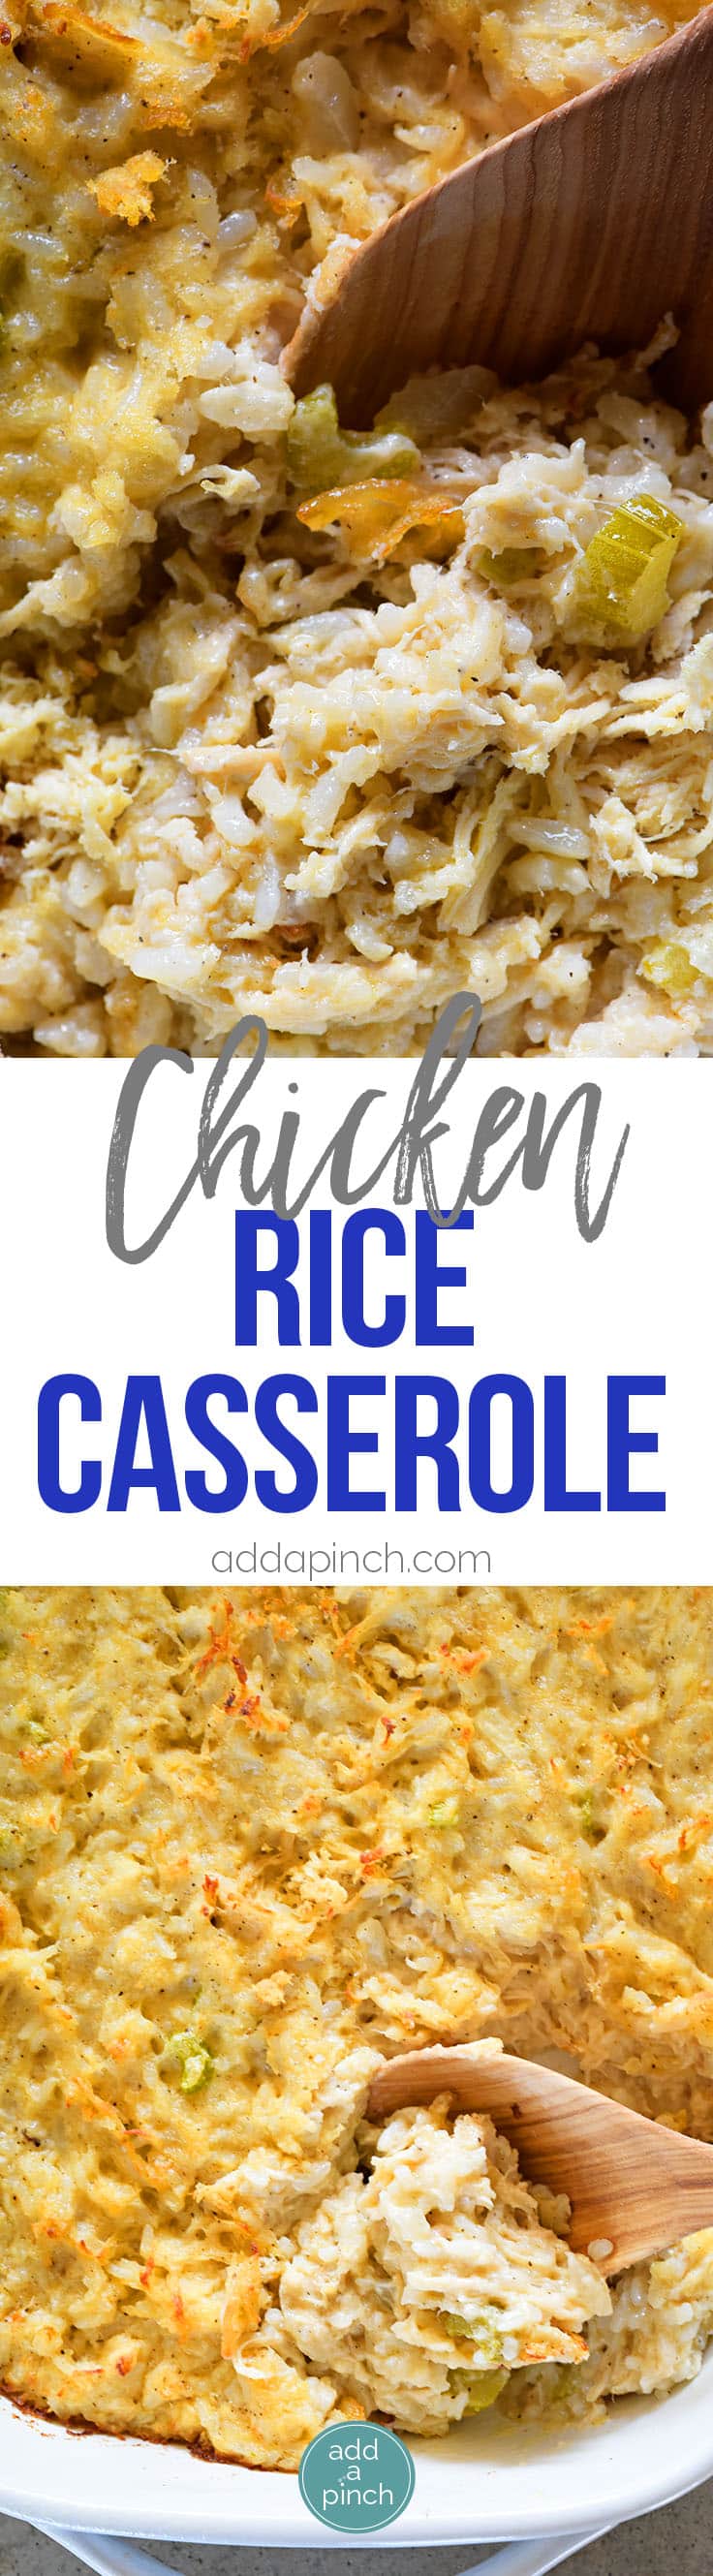 Chicken and Rice Casserole Recipe - Chicken and Rice Casserole makes a classic comforting dish. Made of chicken and rice cooked in a creamy, flavorful casserole, this is a family favorite! // addapinch.com